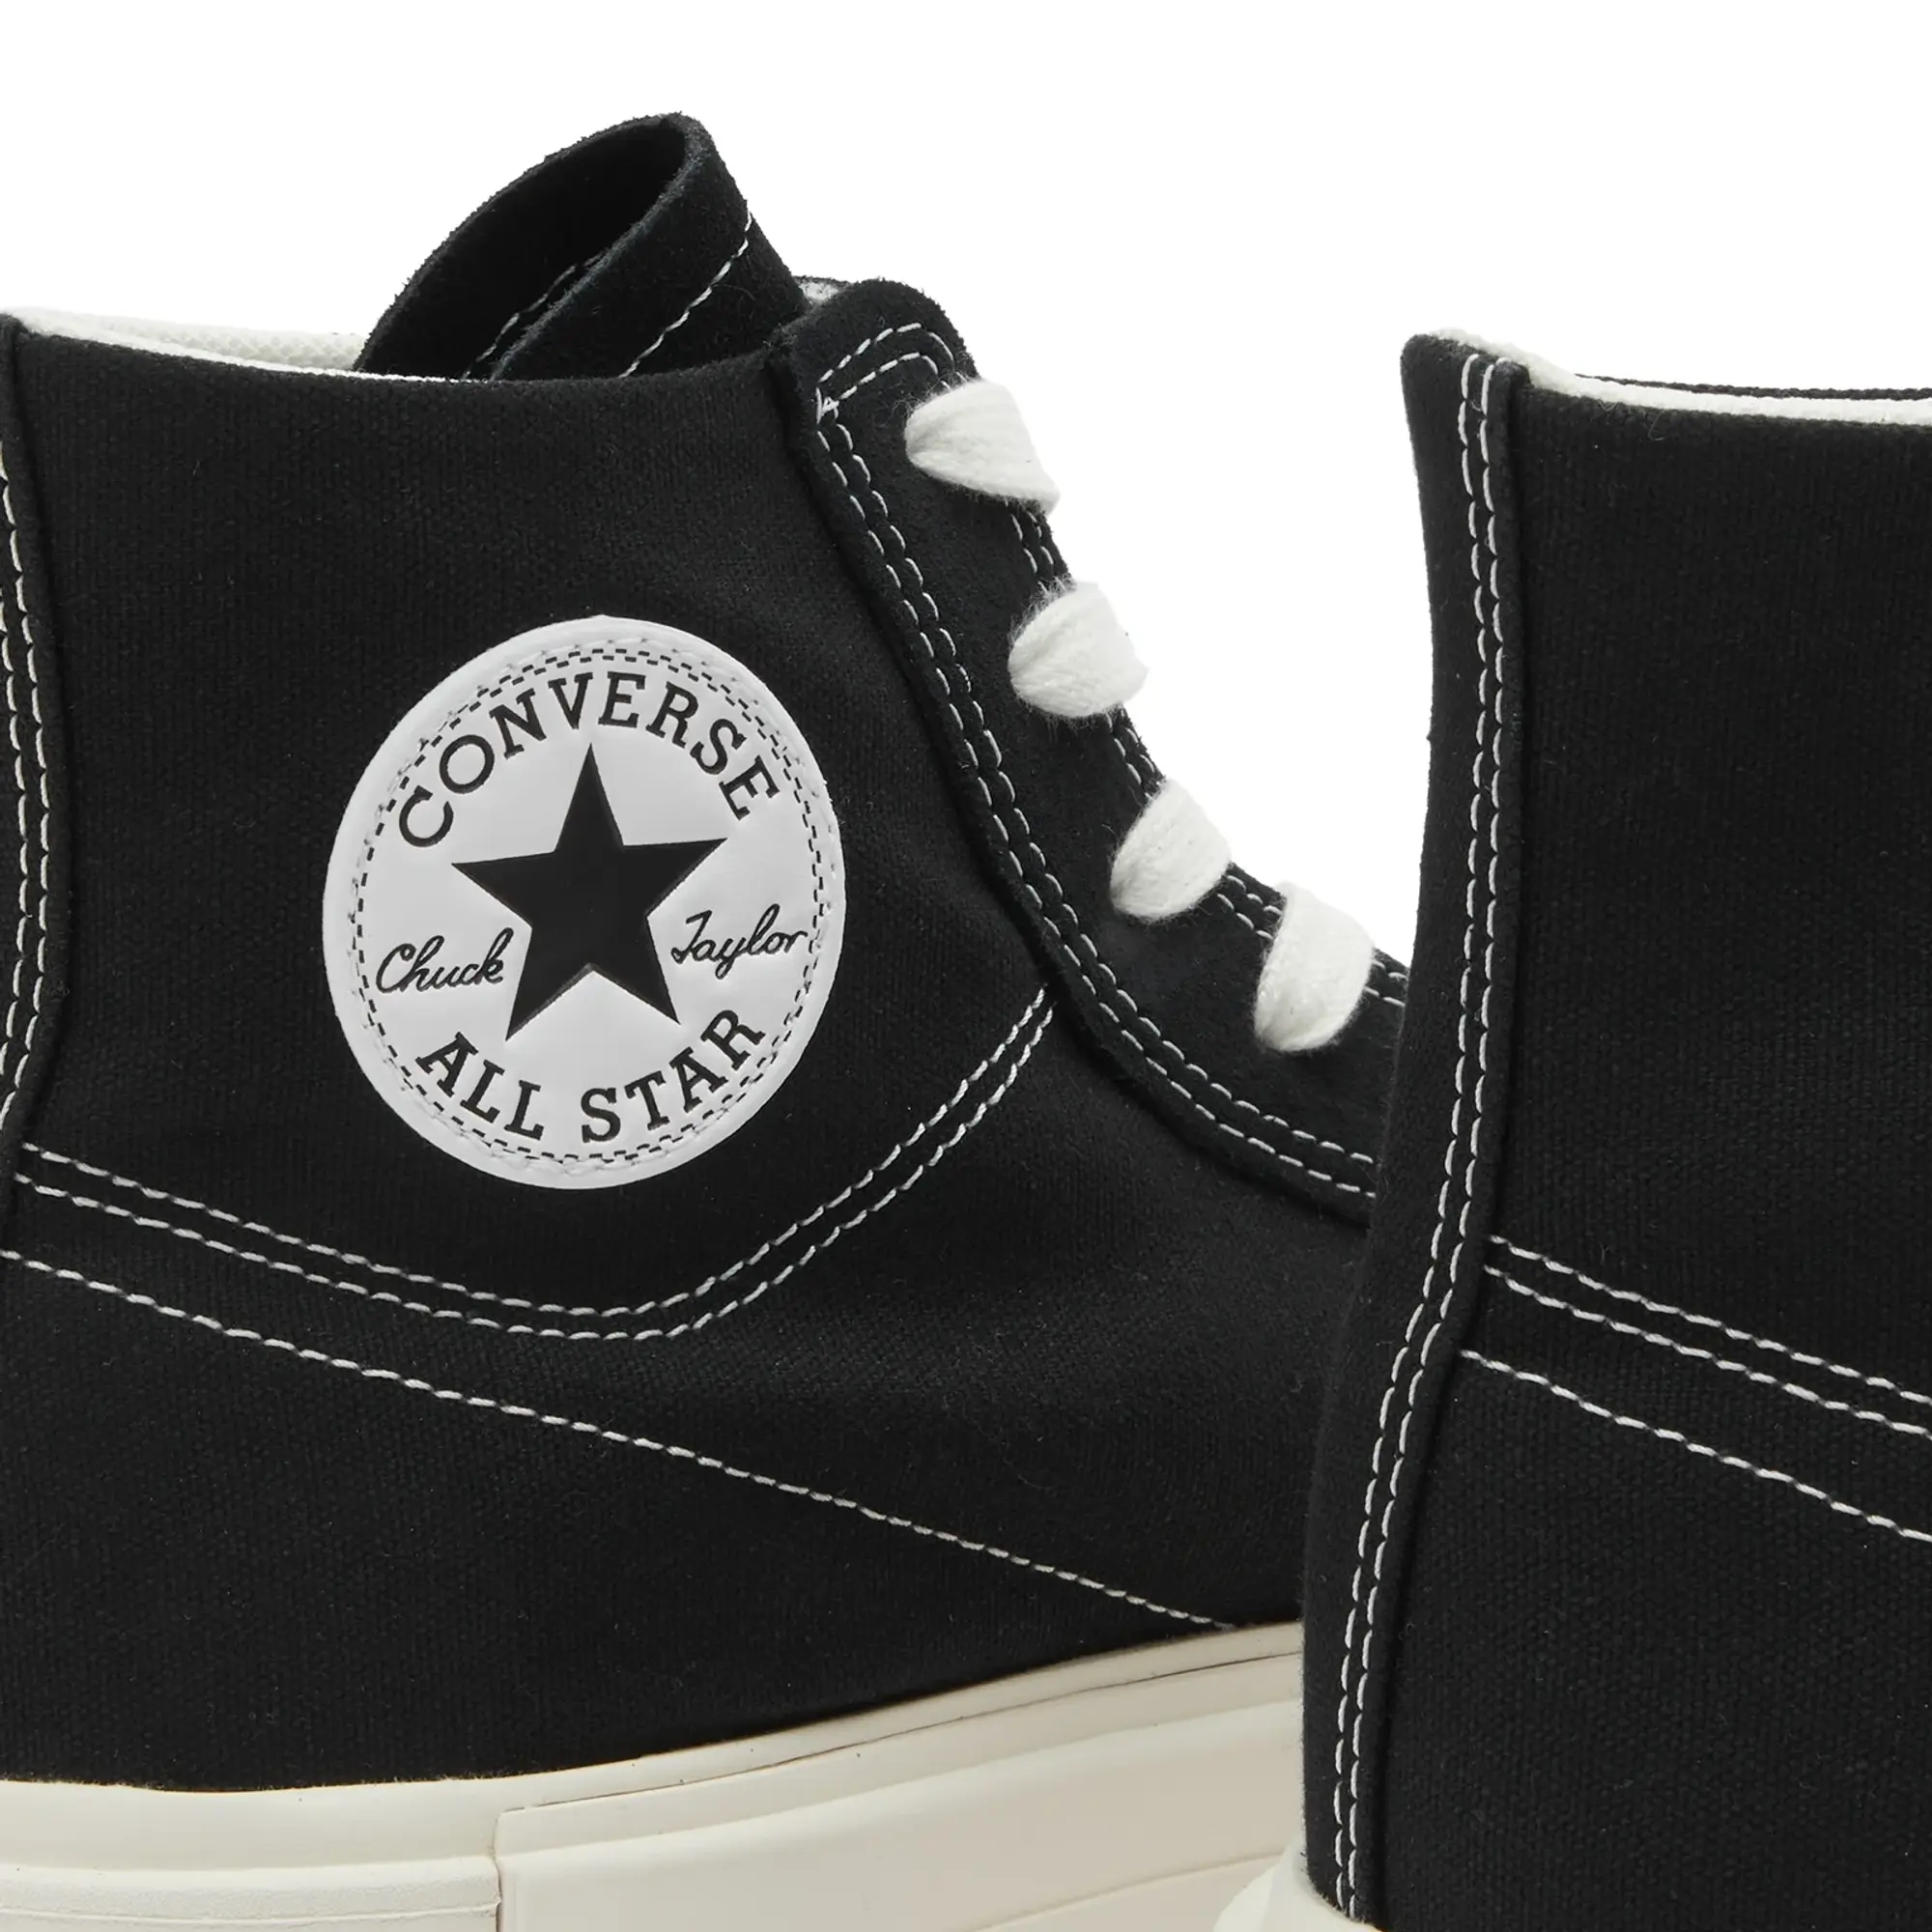 Converse Womens Chuck Taylor All Star Cruise Trainer - Black